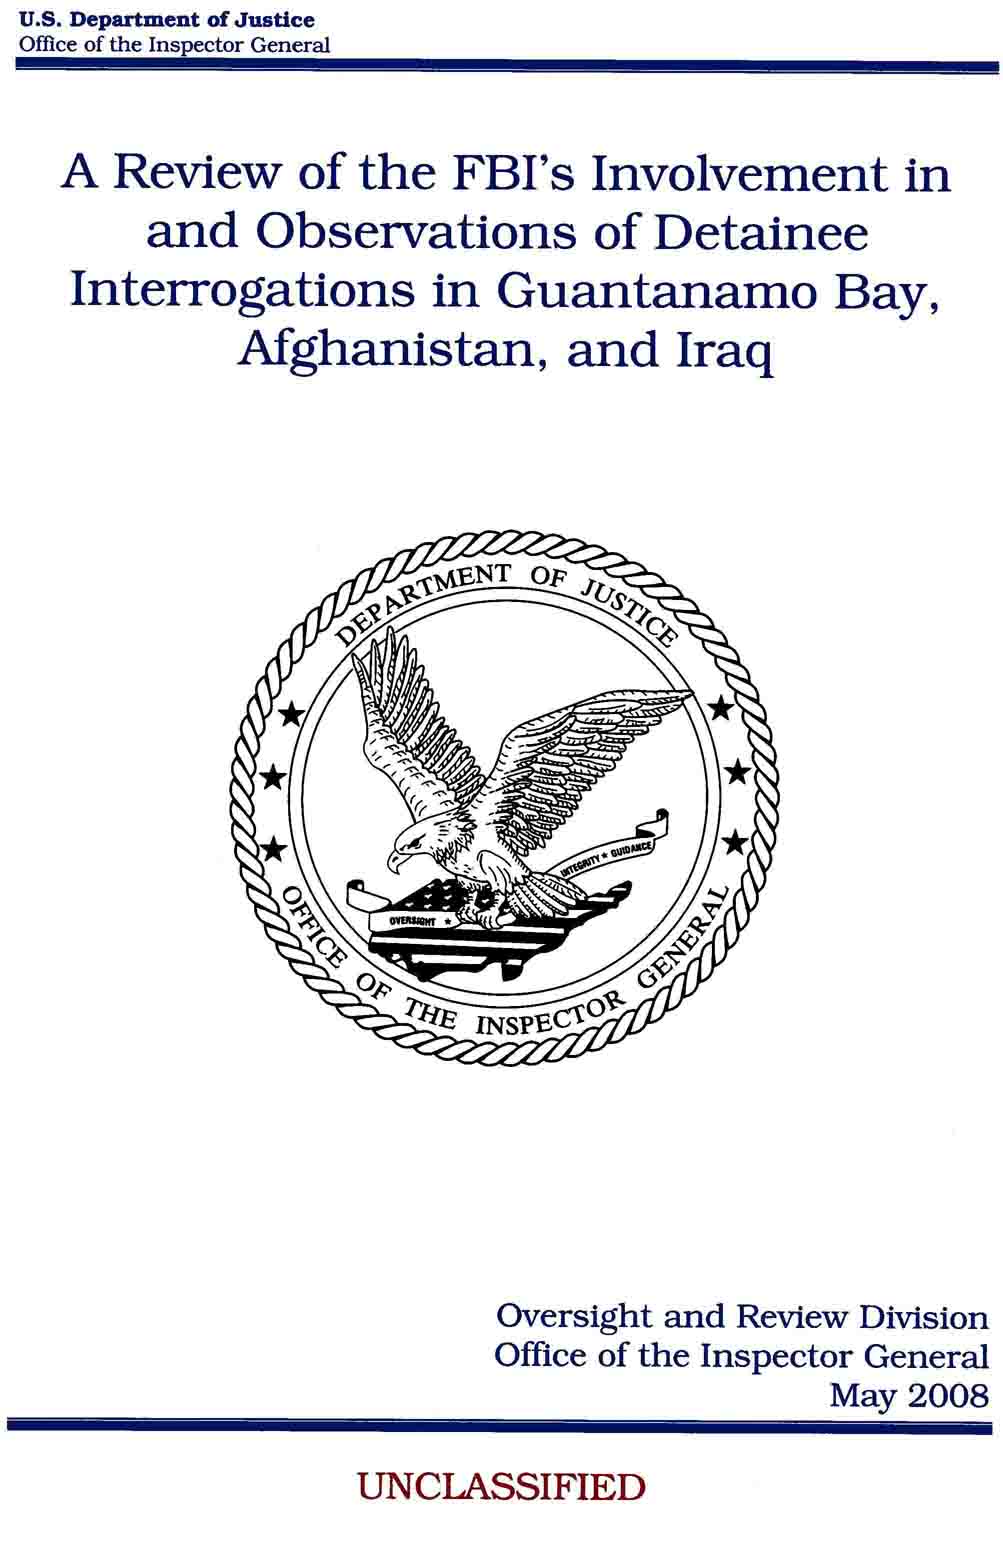 Cover of the FBI Review, 2008